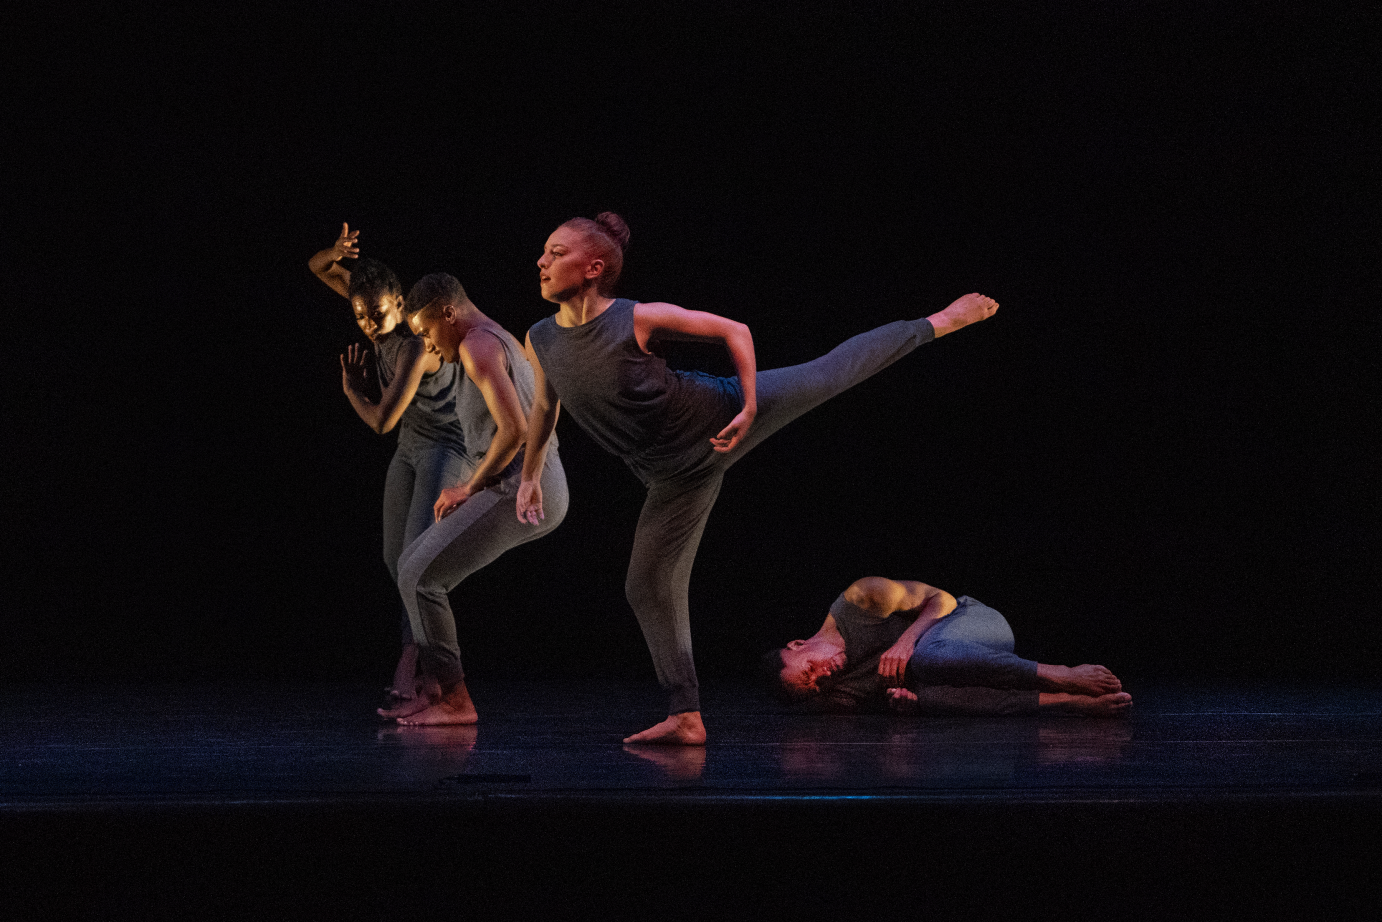 The picture is four dancers in a tableau. From left to right: two dancers look down, their shoulders hunched; one dancer extends her leg in arabesque; another dancer is prone on the floor in the fetal position.